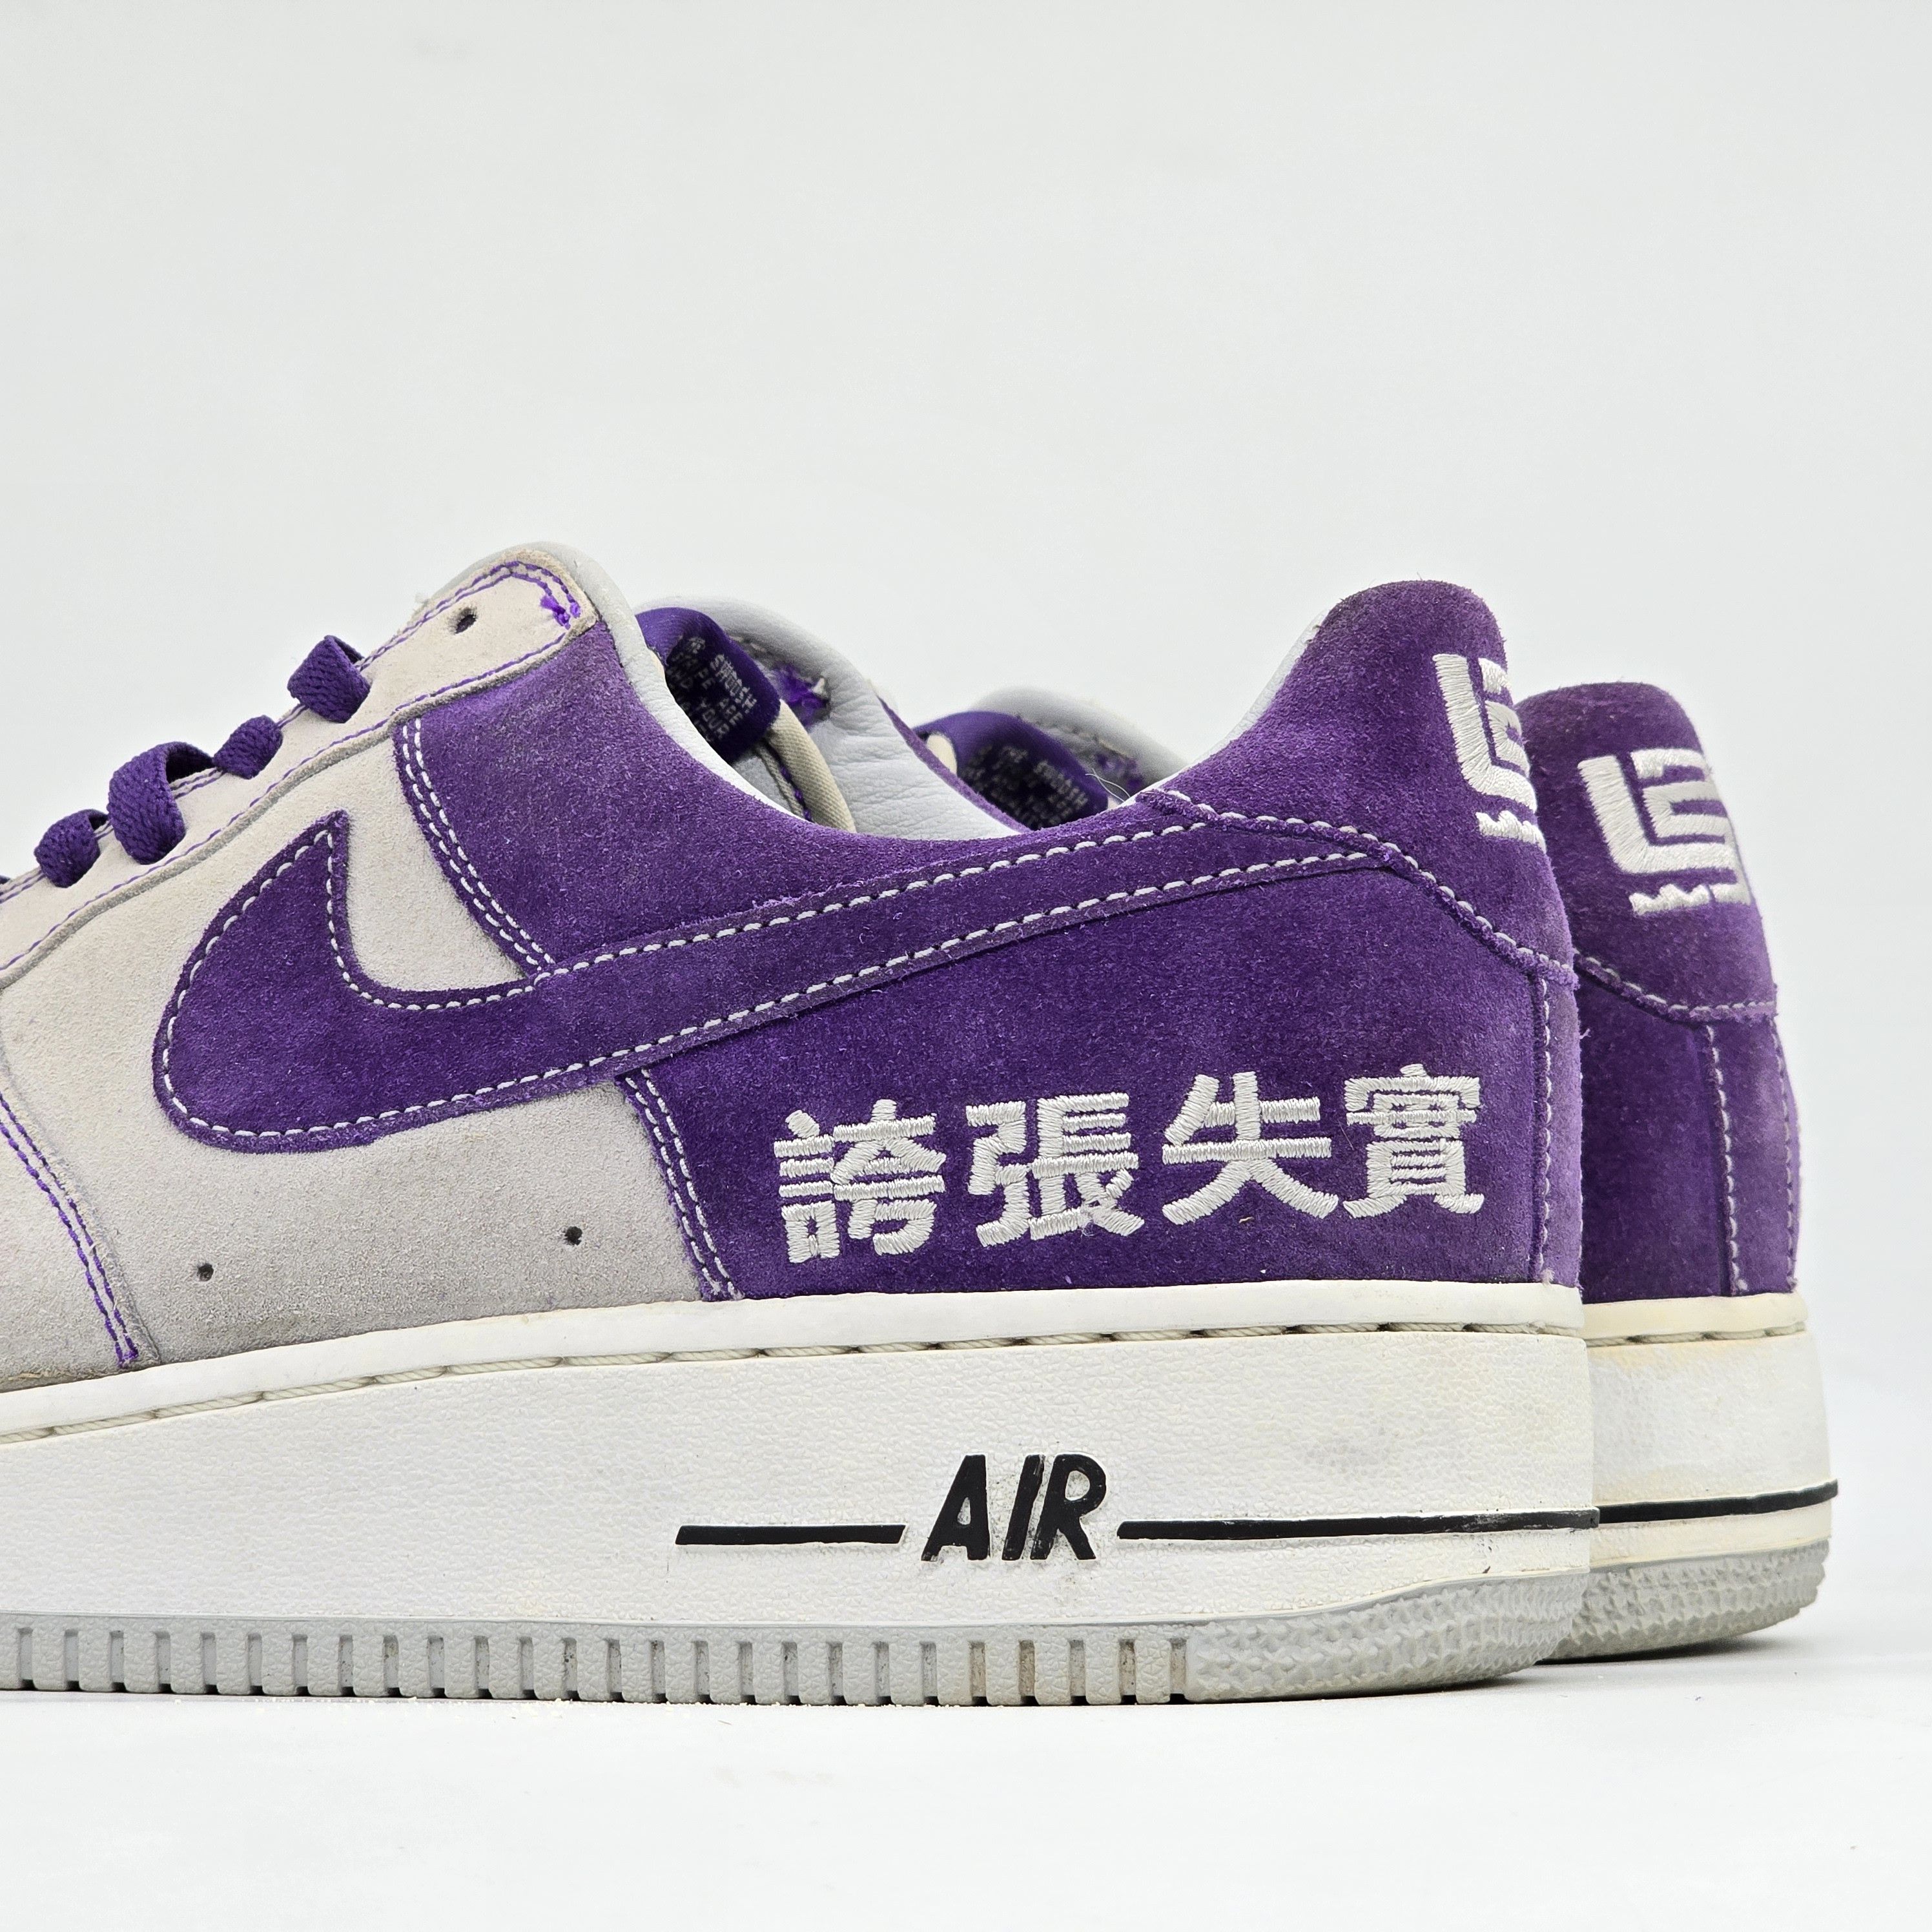 Nike - 2005 Airforce 1 Chamber of Fear "Hype" - 9